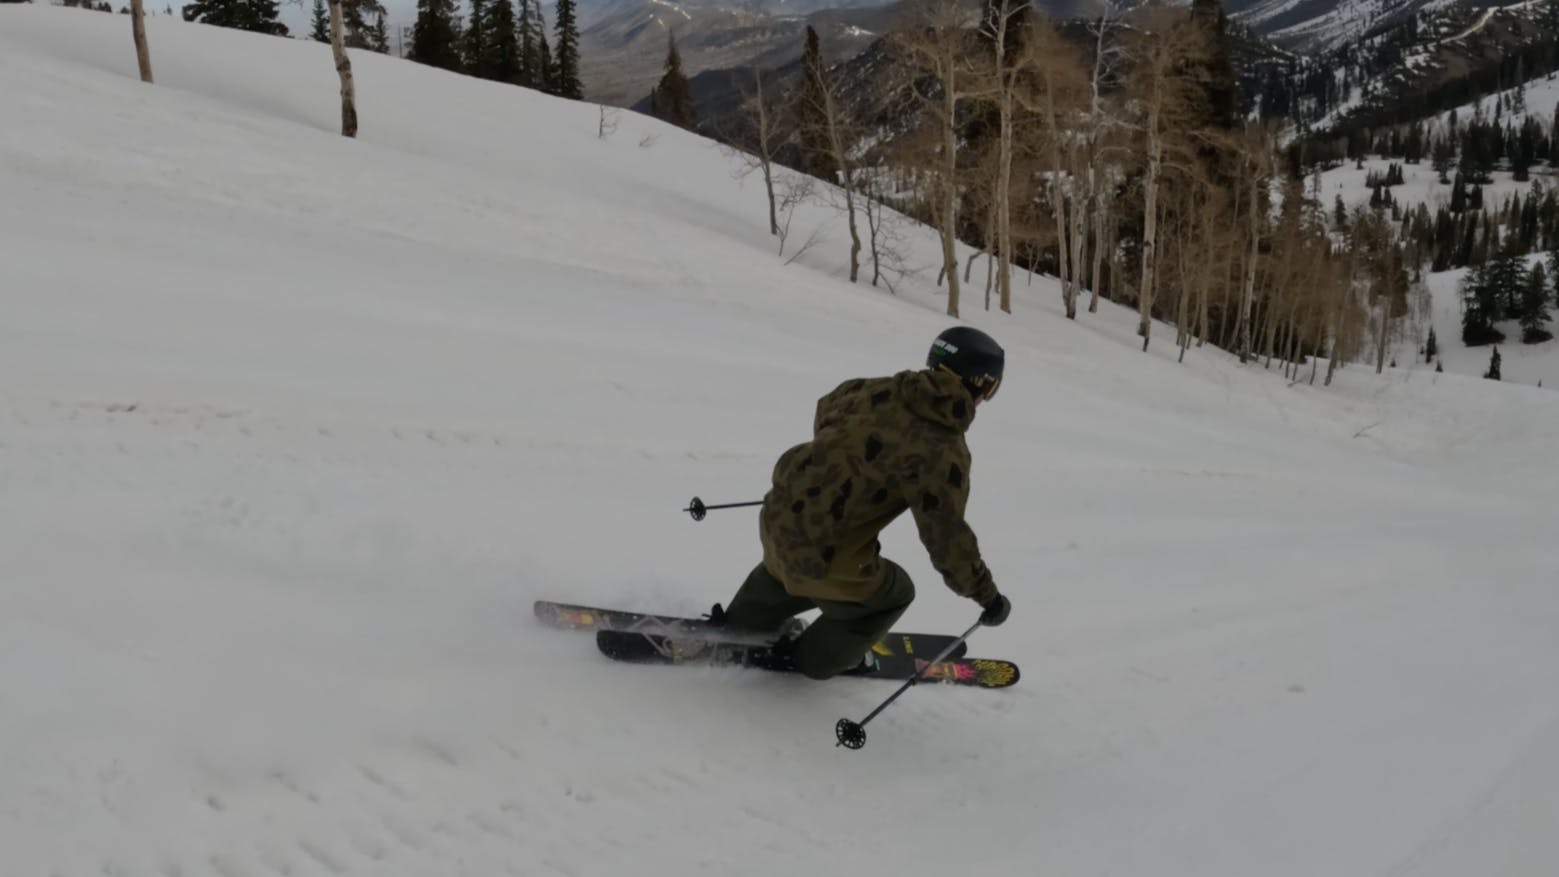 A skier on the 2023 Line Chronic Skis.